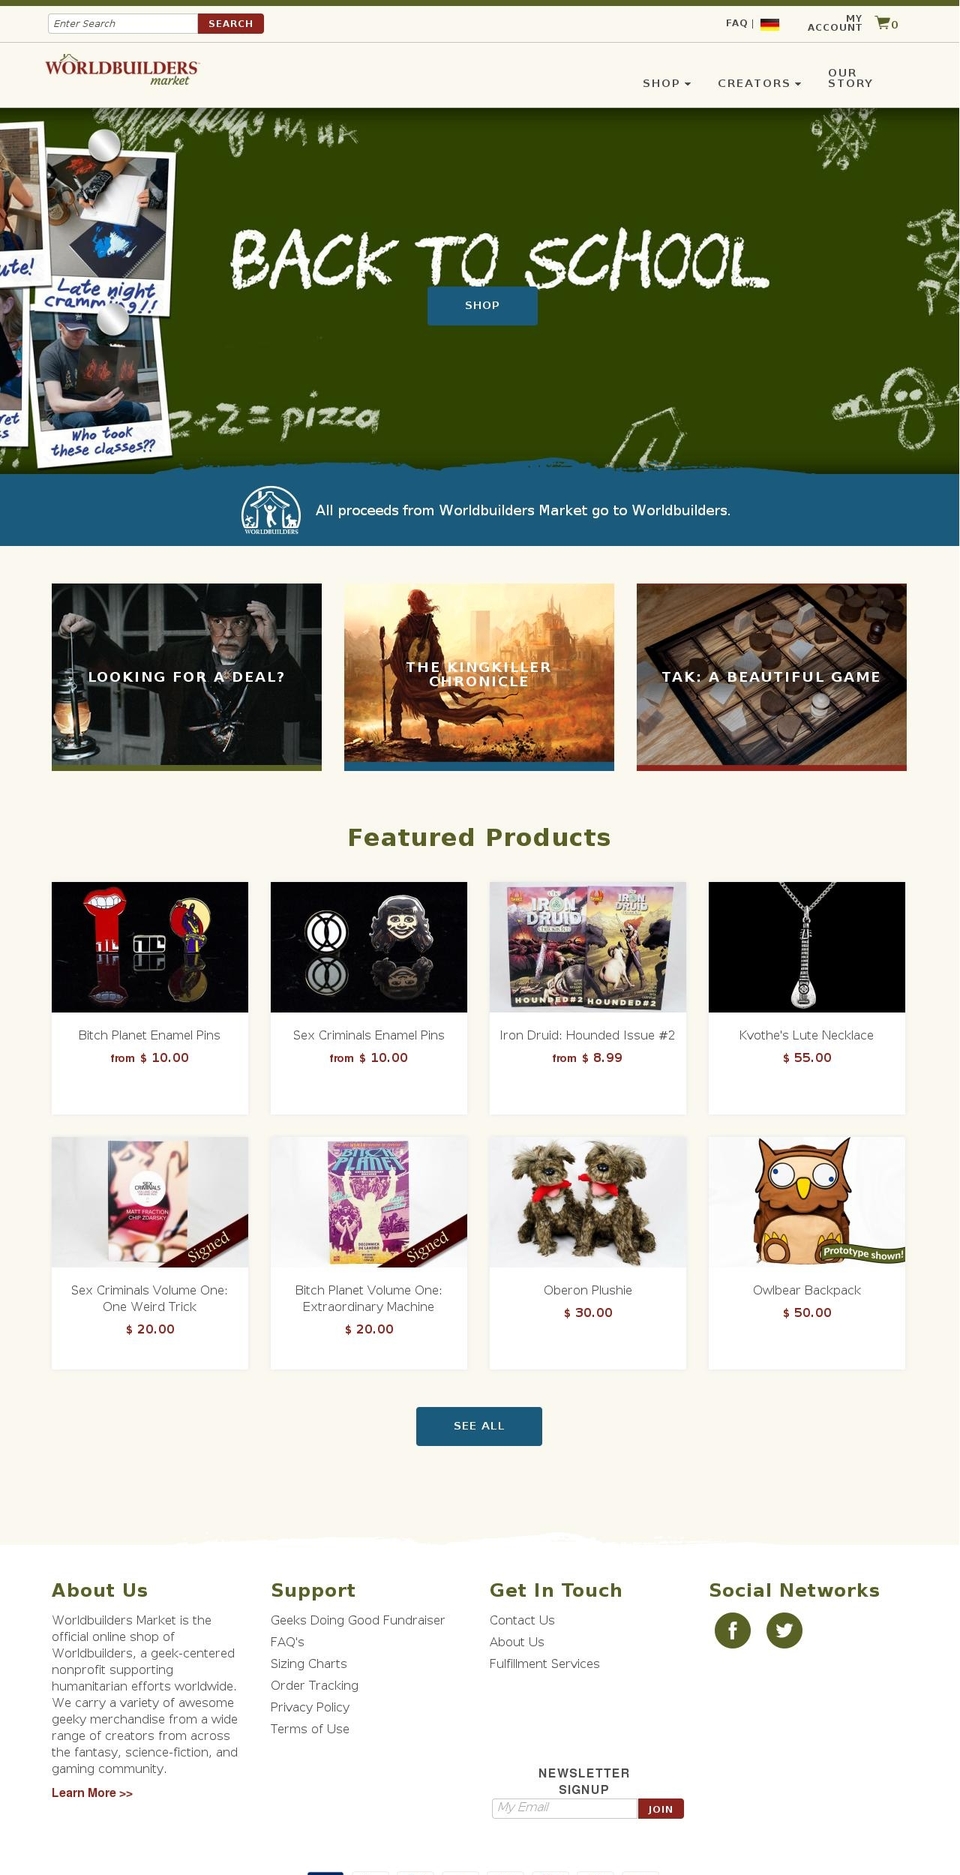 Worldbuilders Market - Standard Shopify theme site example tinkerspack.com